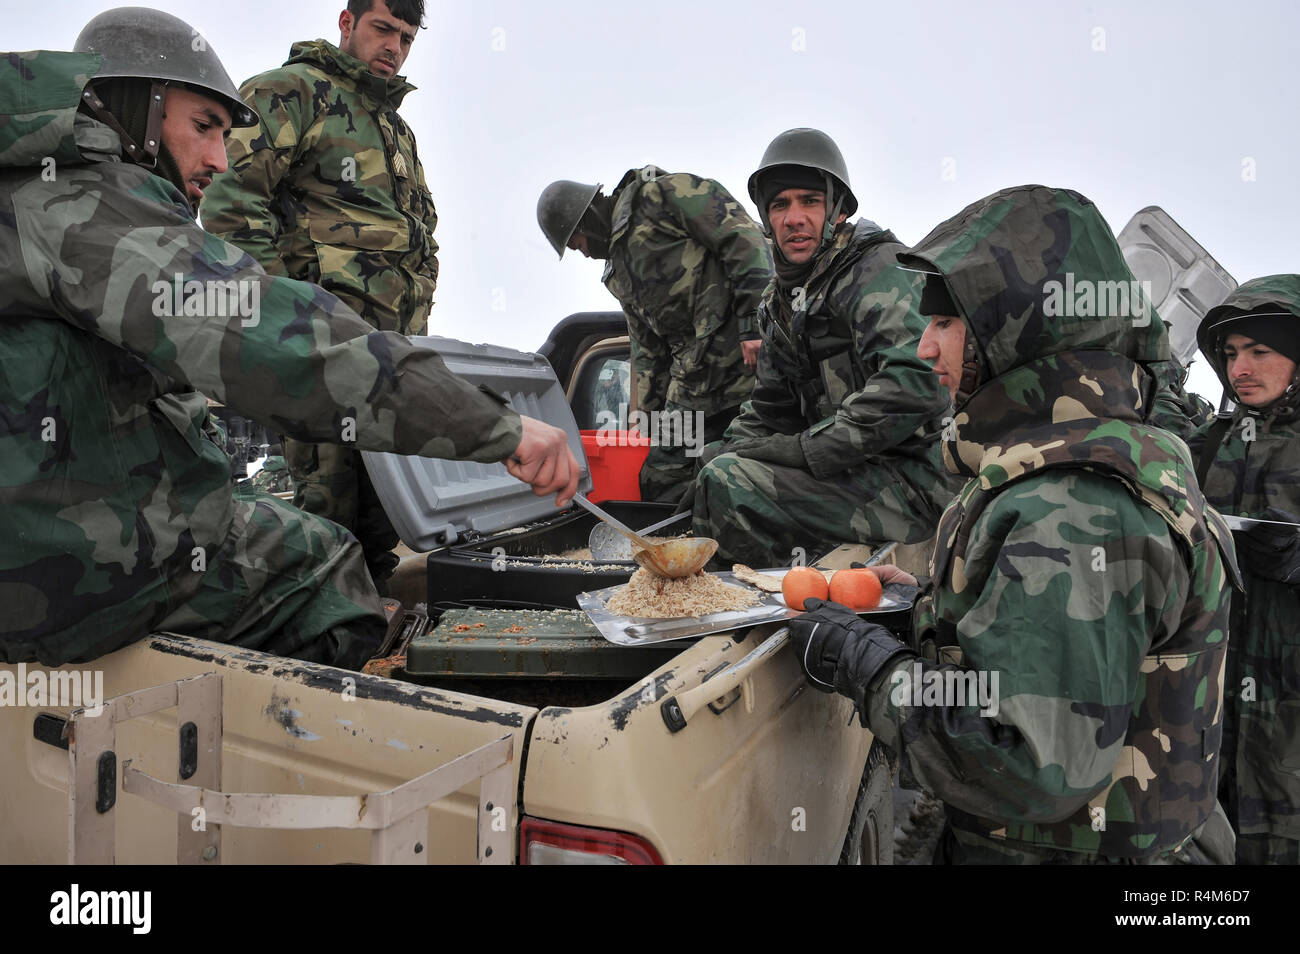 Kabul, Kabul/ Afghanistan - circa 2008: The Kabul Military Training Centre is a basic training centre for the Afghan Armed Forces. Stock Photo